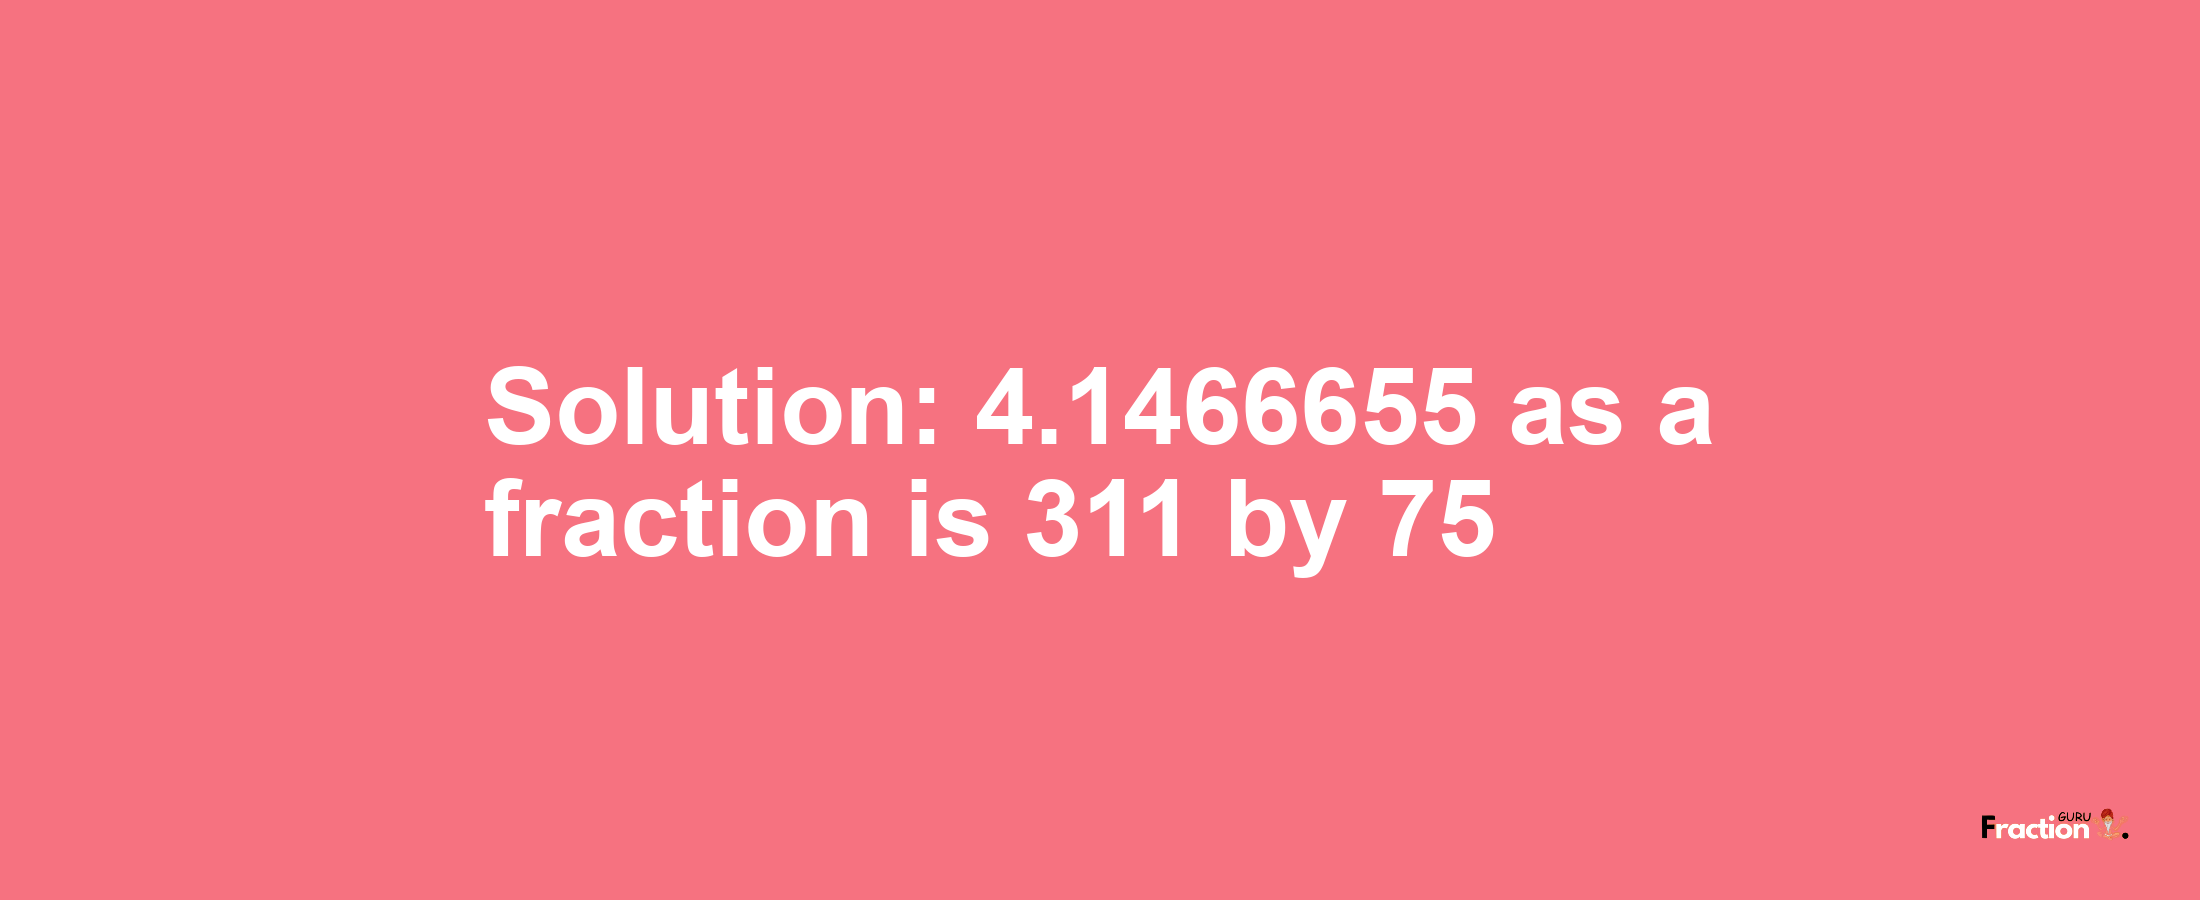 Solution:4.1466655 as a fraction is 311/75